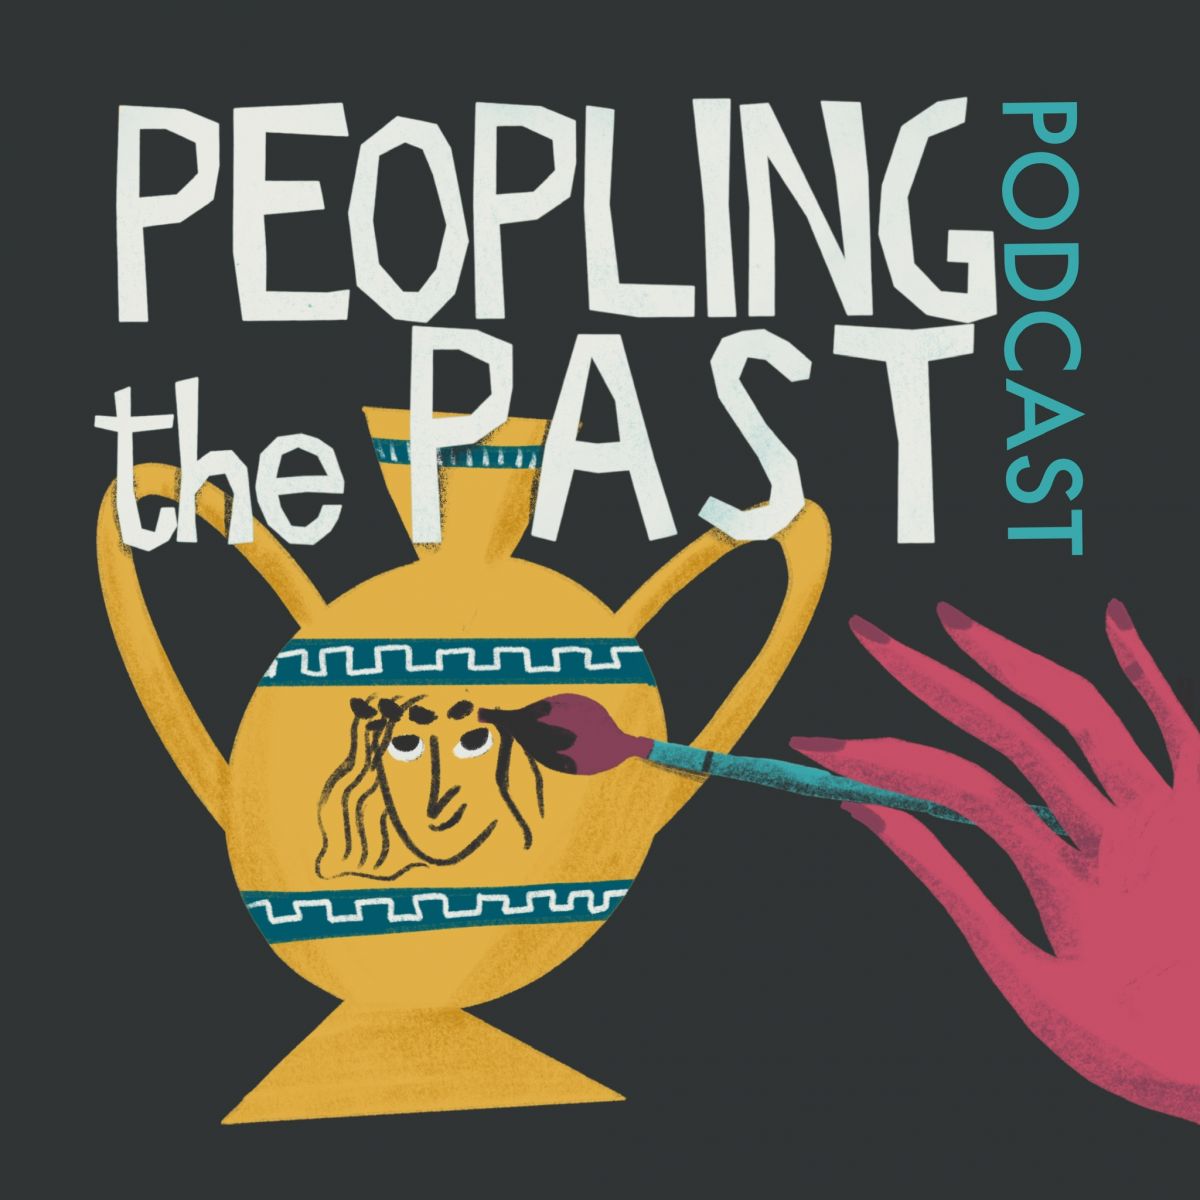 An illustration of a hand holding a paintbrush, painting a face onto a stylized yellow amphora. The text reads "PEOPLEING THE PAST PODCAST"